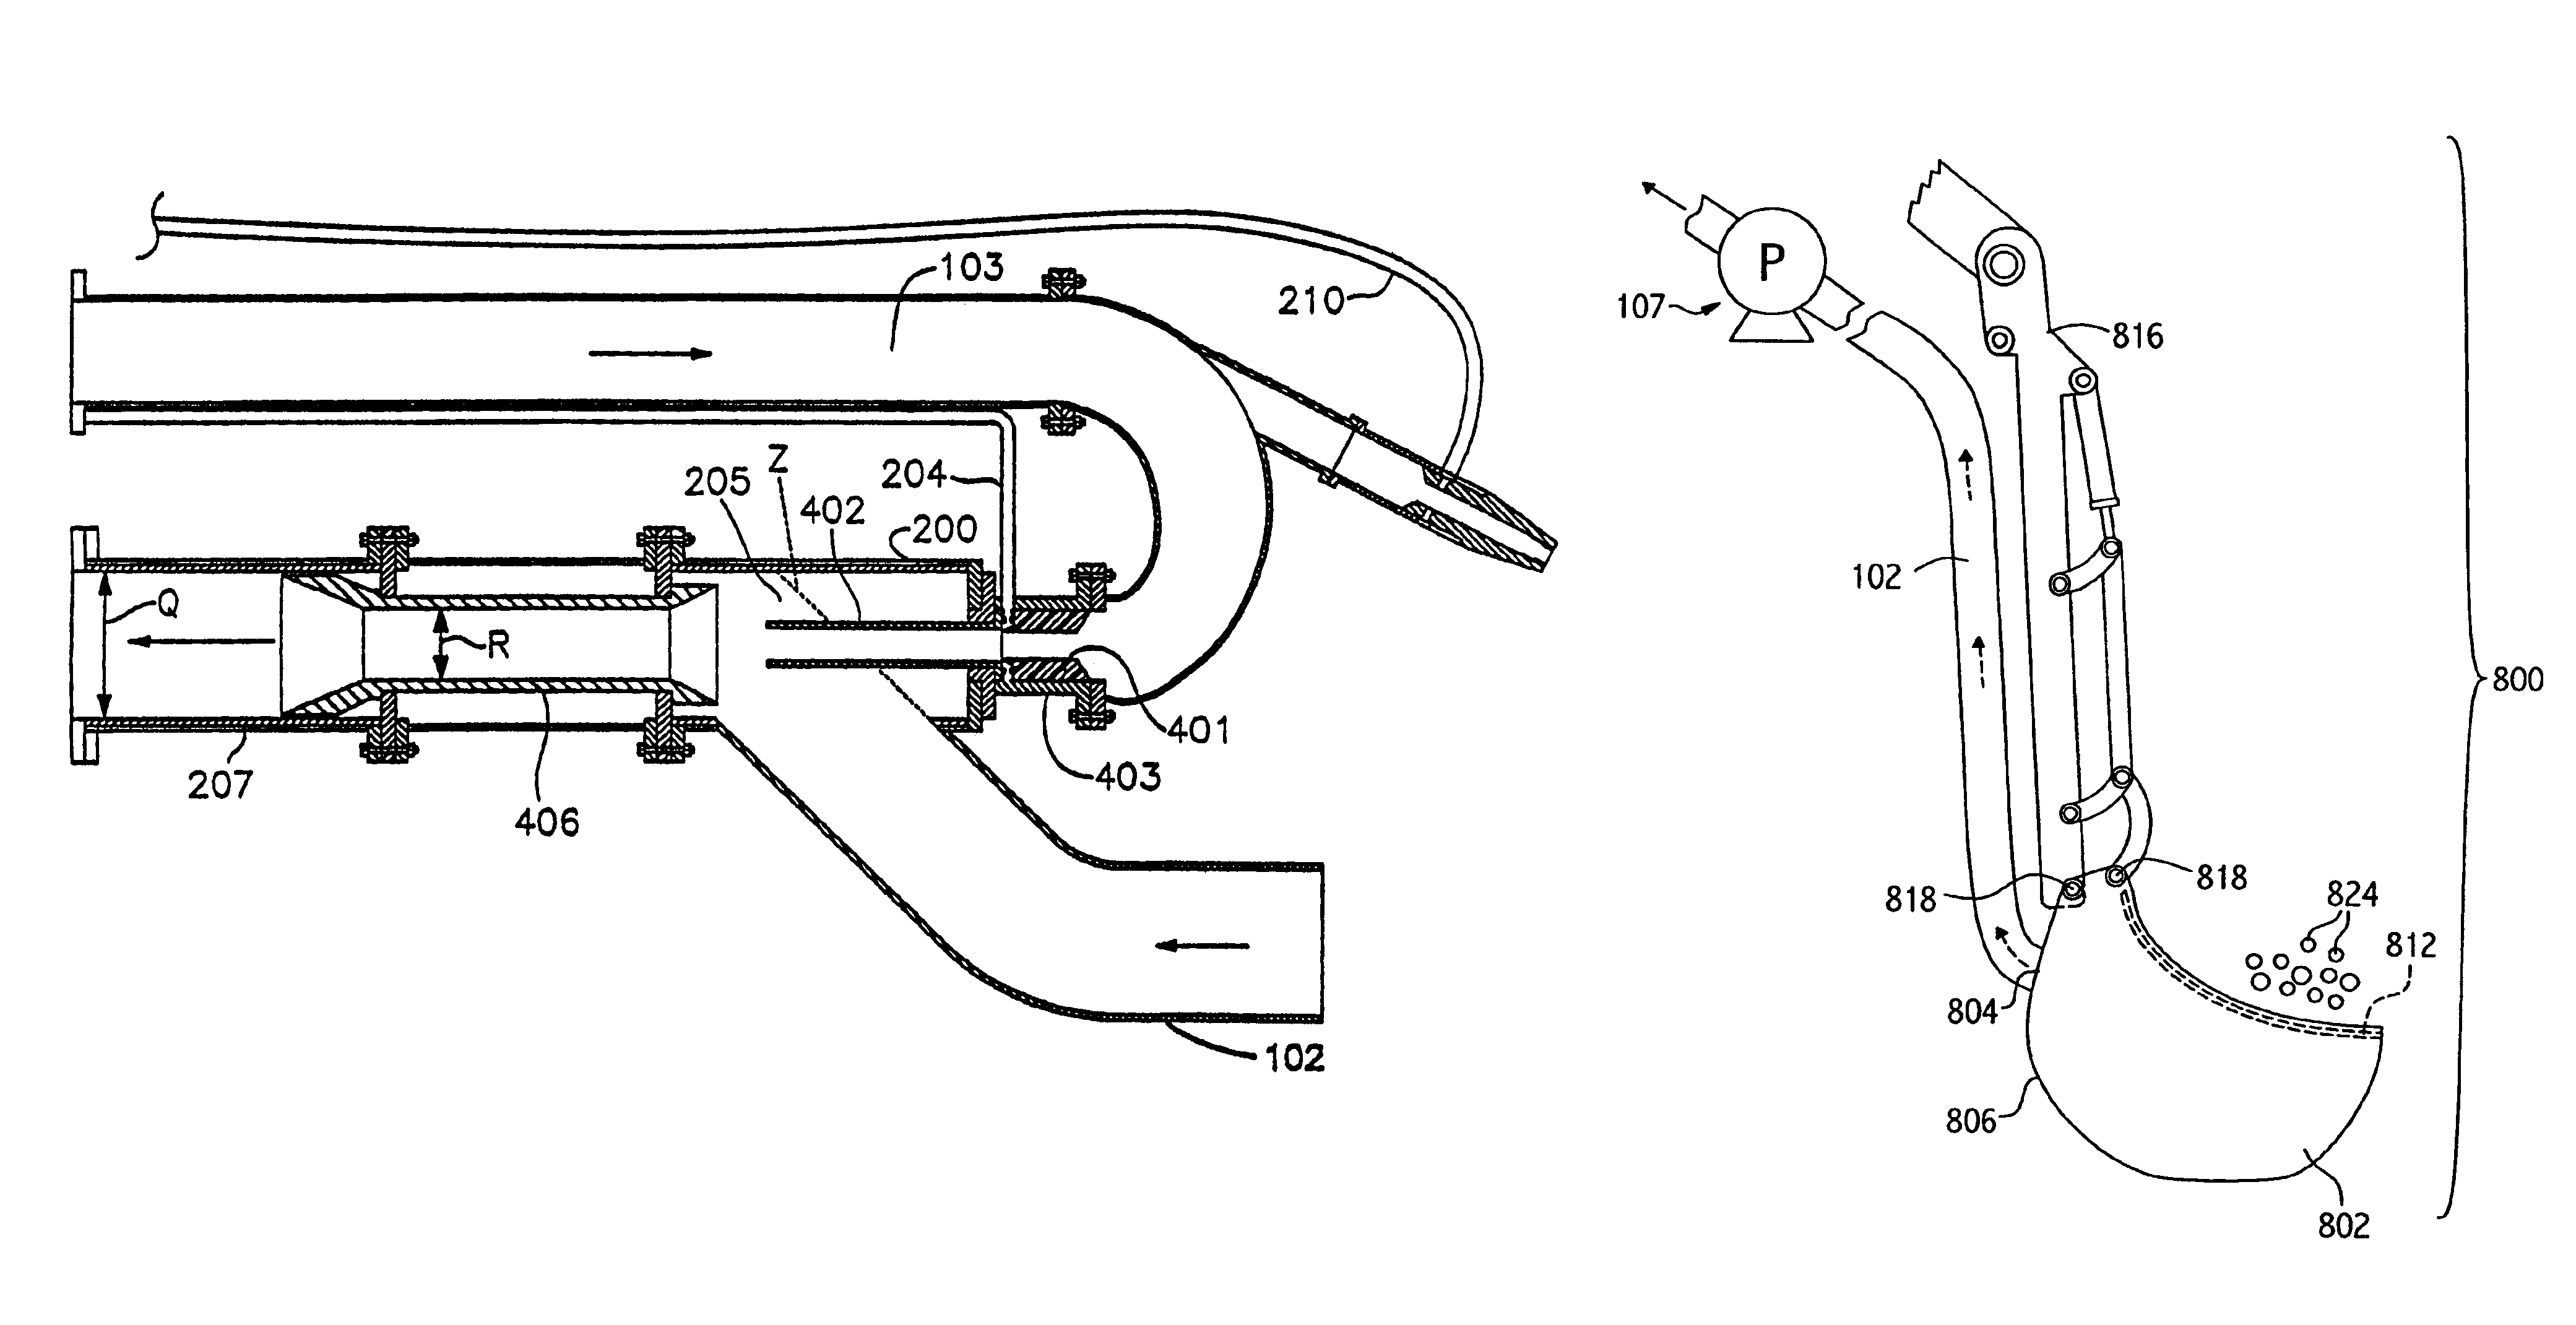 Excavation system employing a jet pump